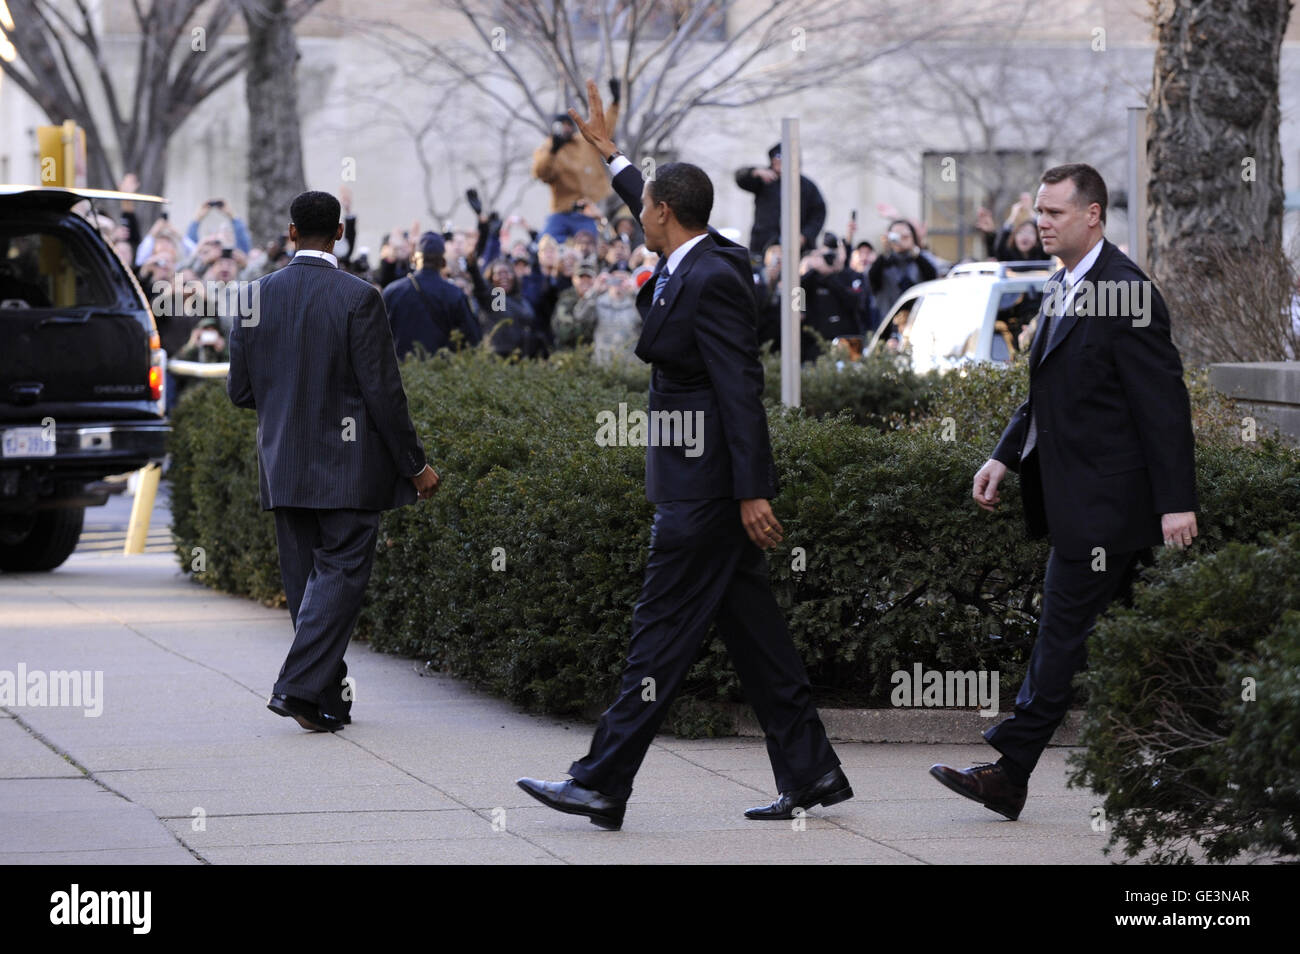 Washington, District of Columbia, USA. 8th Jan, 2009. Washington, DC - January 8, 2009 -- United States President-elect Barack Obama (C) waves to supporters as he leaves the Presidential Inaugural Committee Headquarters in Washington on Thursday, January 8, 2009. Credit: Kevin Dietsch - Pool via CNP © Kevin Dietsch/CNP/ZUMA Wire/Alamy Live News Stock Photo